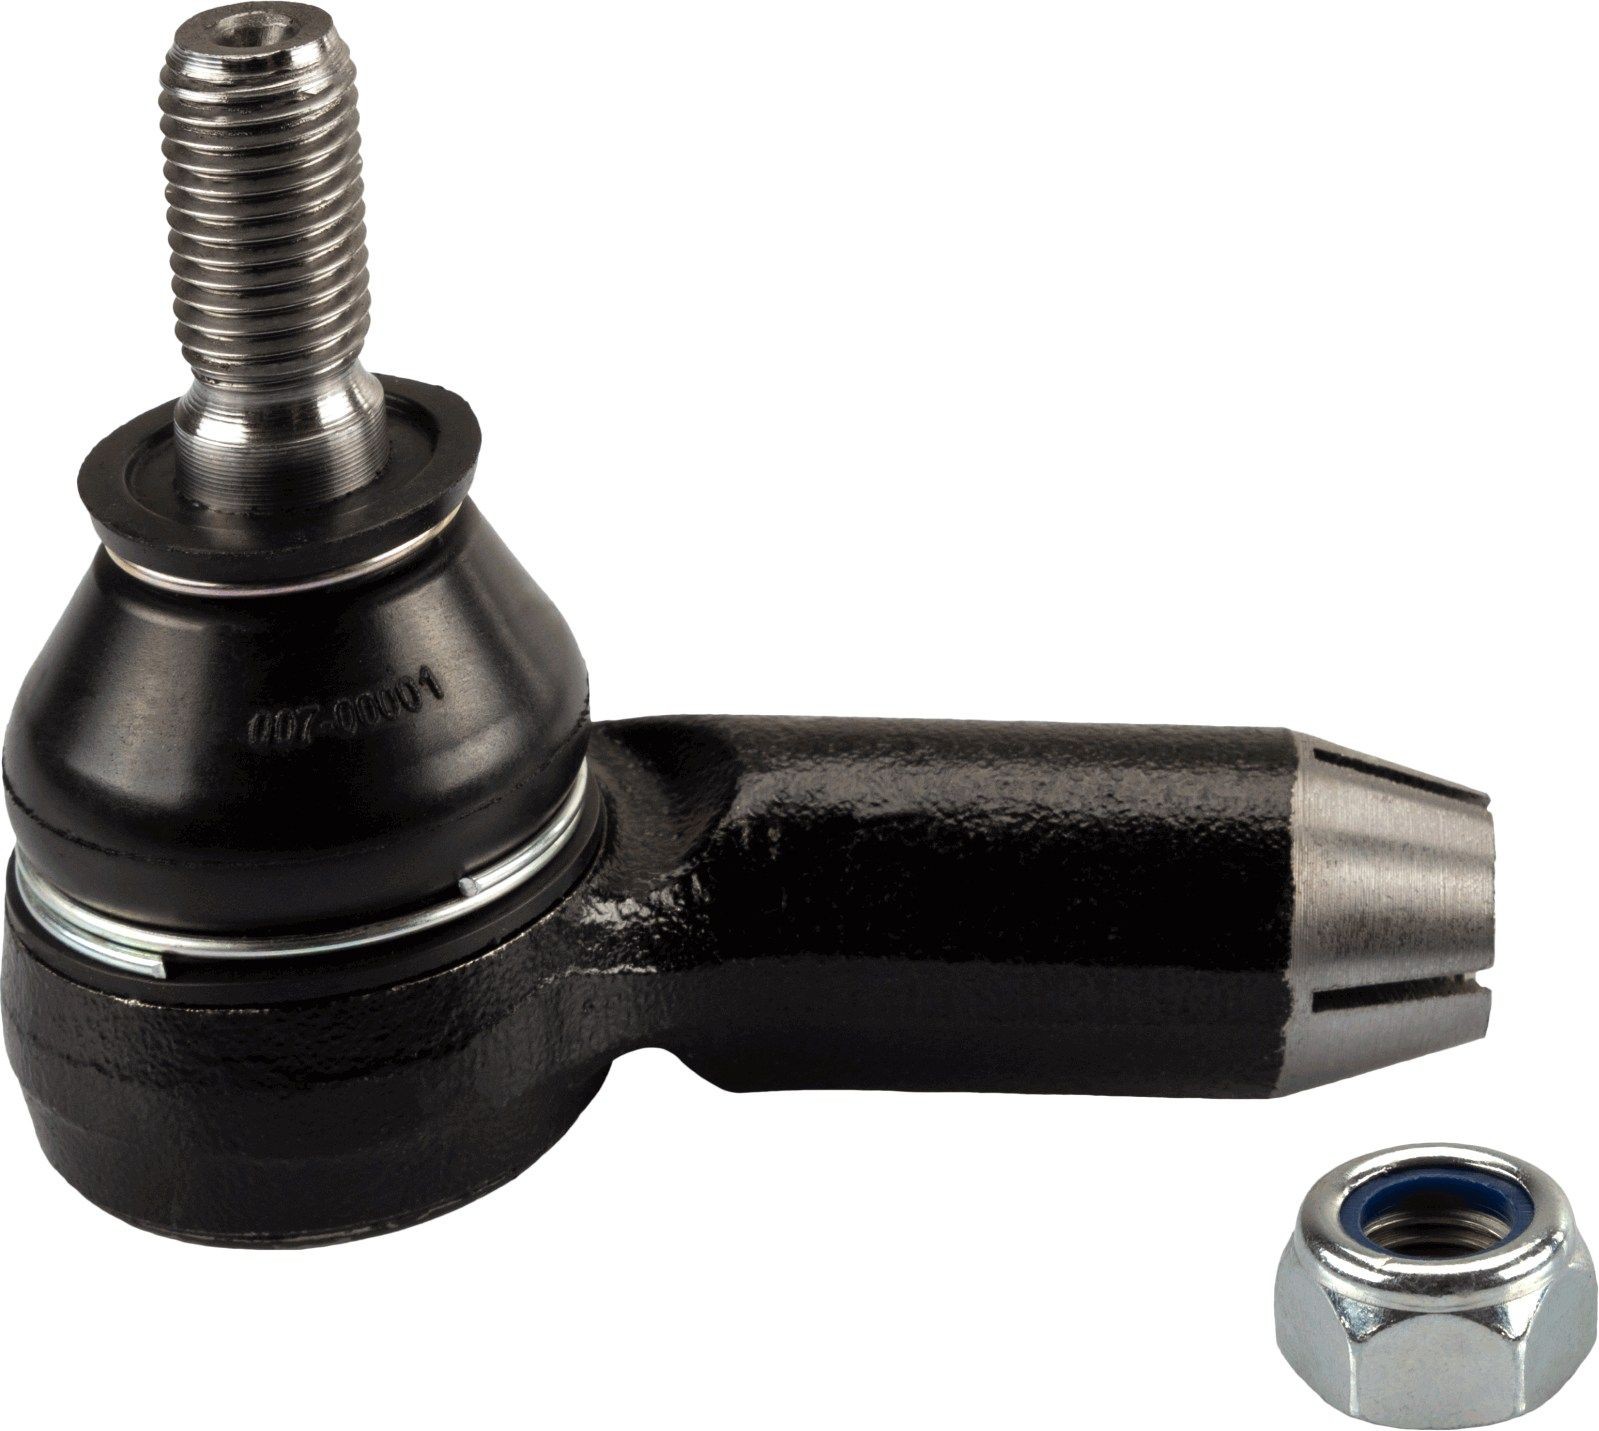 TRW JTE402 Track rod end with accessories